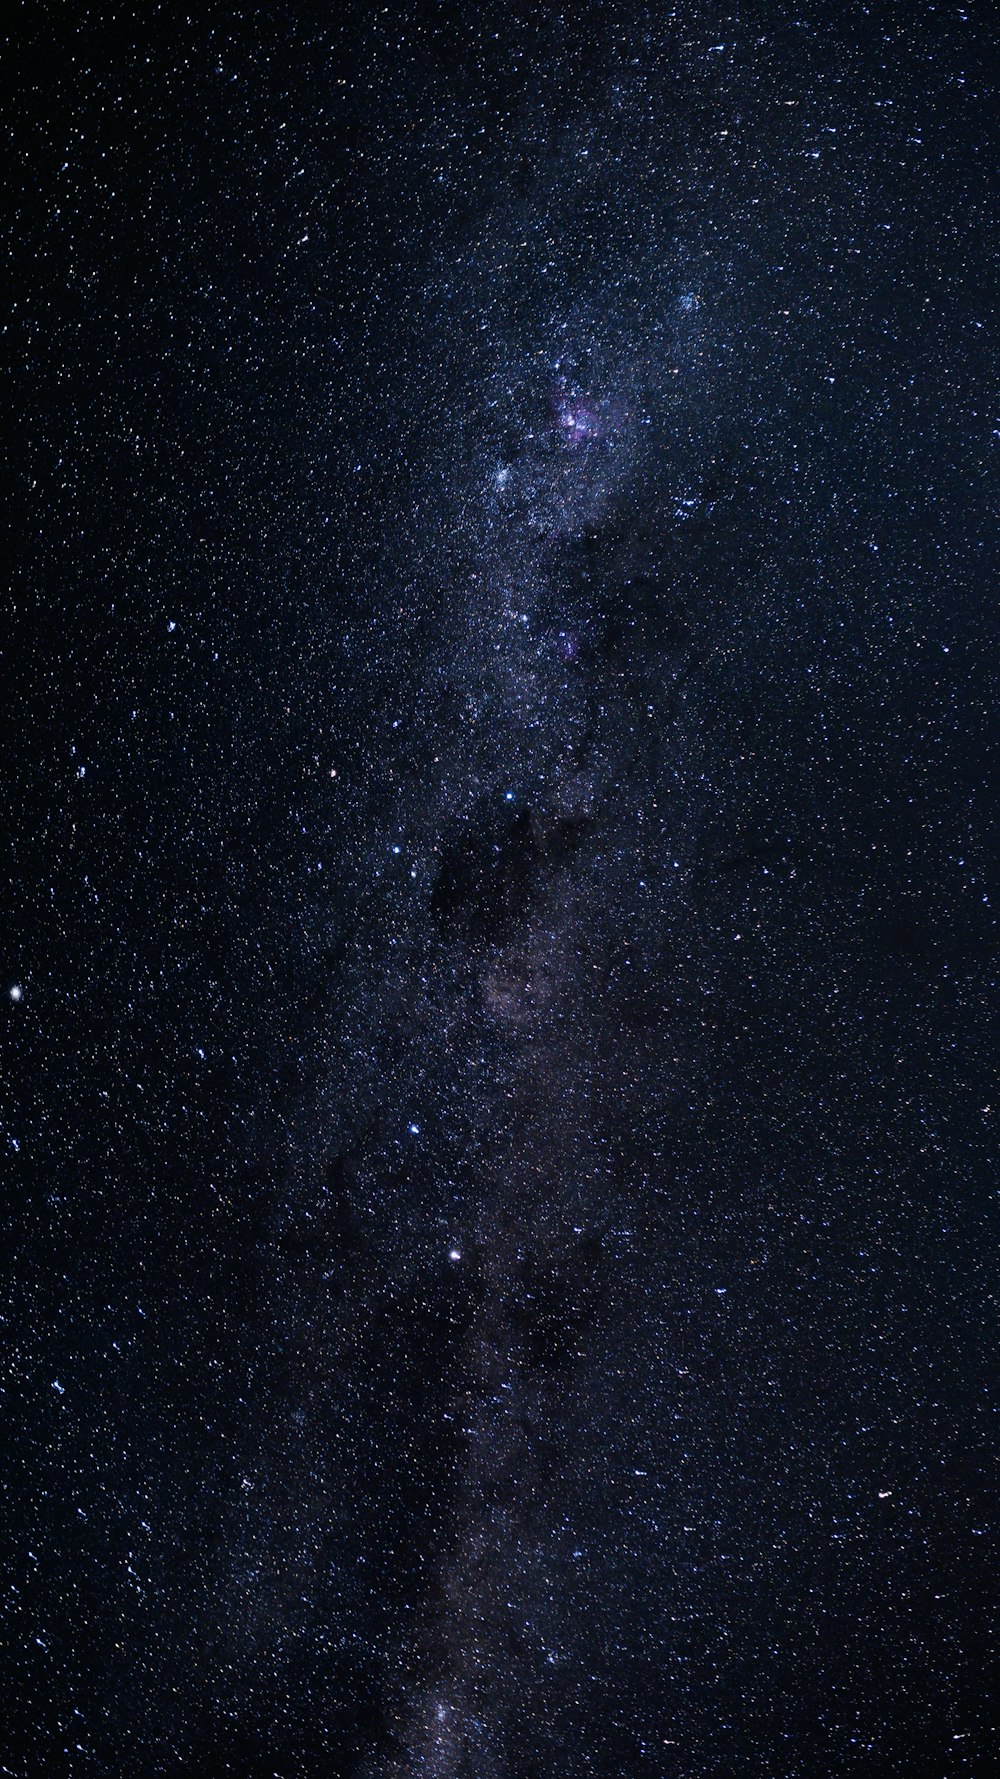 the night sky with stars and the milky